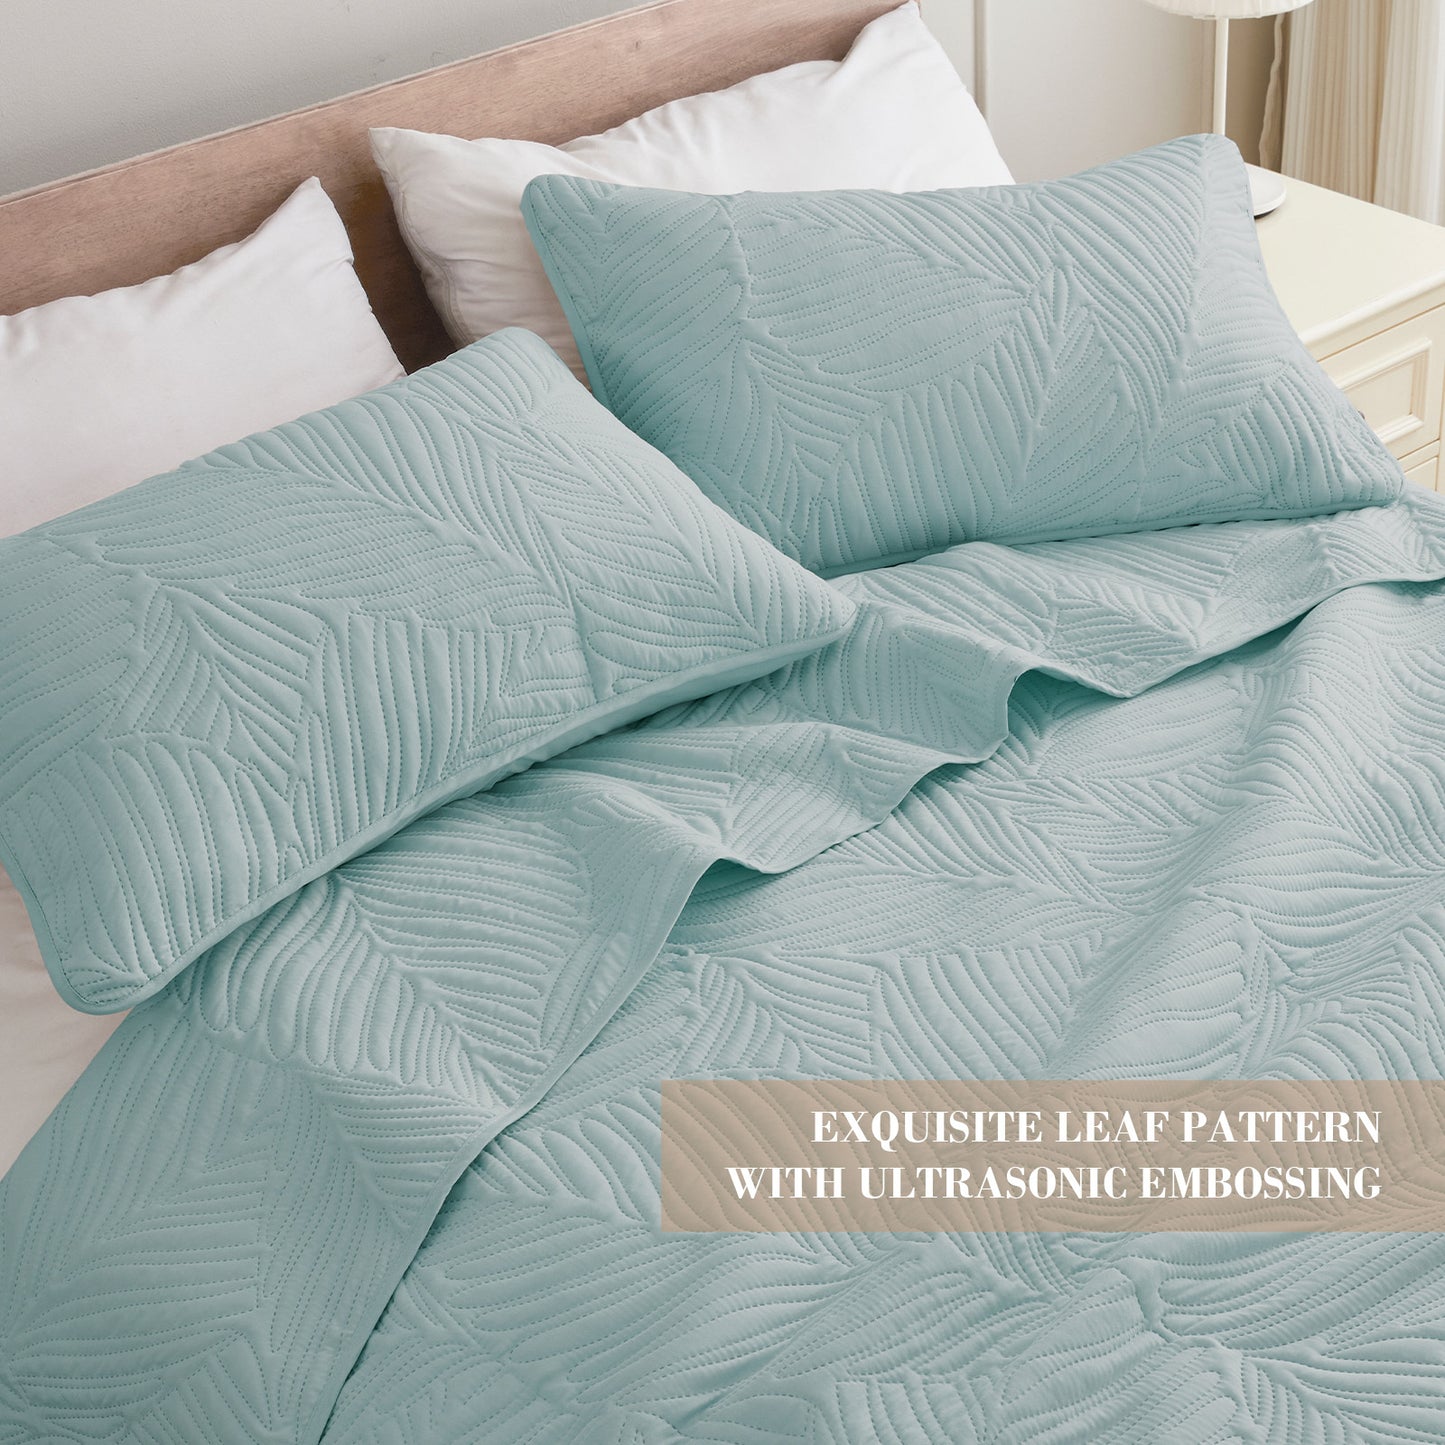 Exclusivo Mezcla Ultrasonic Twin Size Quilt Set Aqua Blue, 2 Pieces Lightweight Bedspread Leaf Pattern Bed Cover Soft Microfiber Coverlet Bedding Set for All Seasons